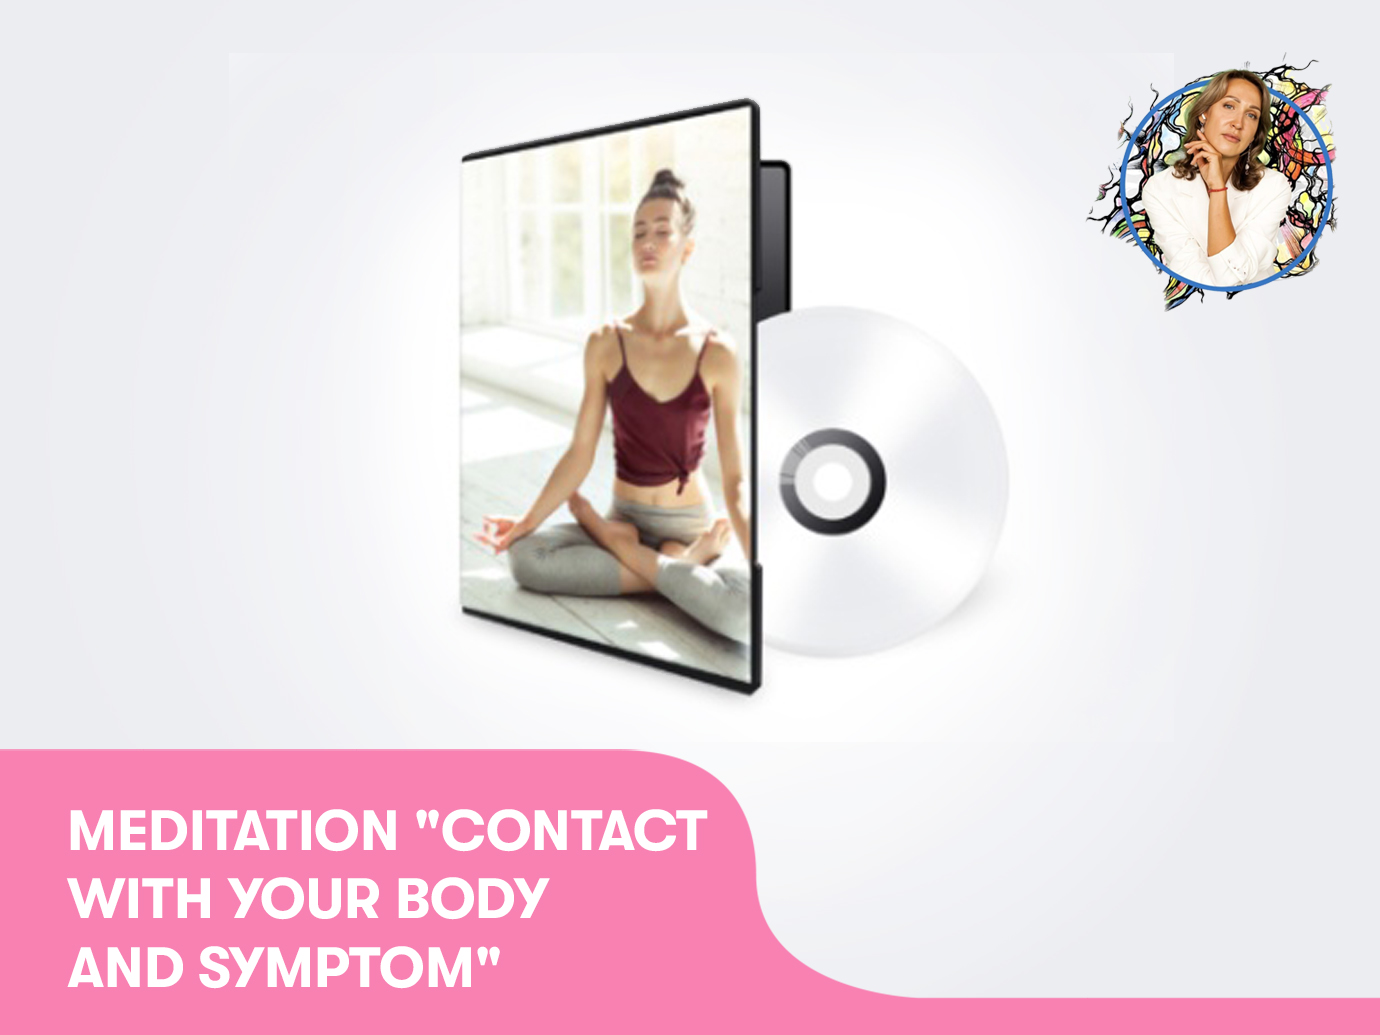 Meditation “Contact with your body and symptom“